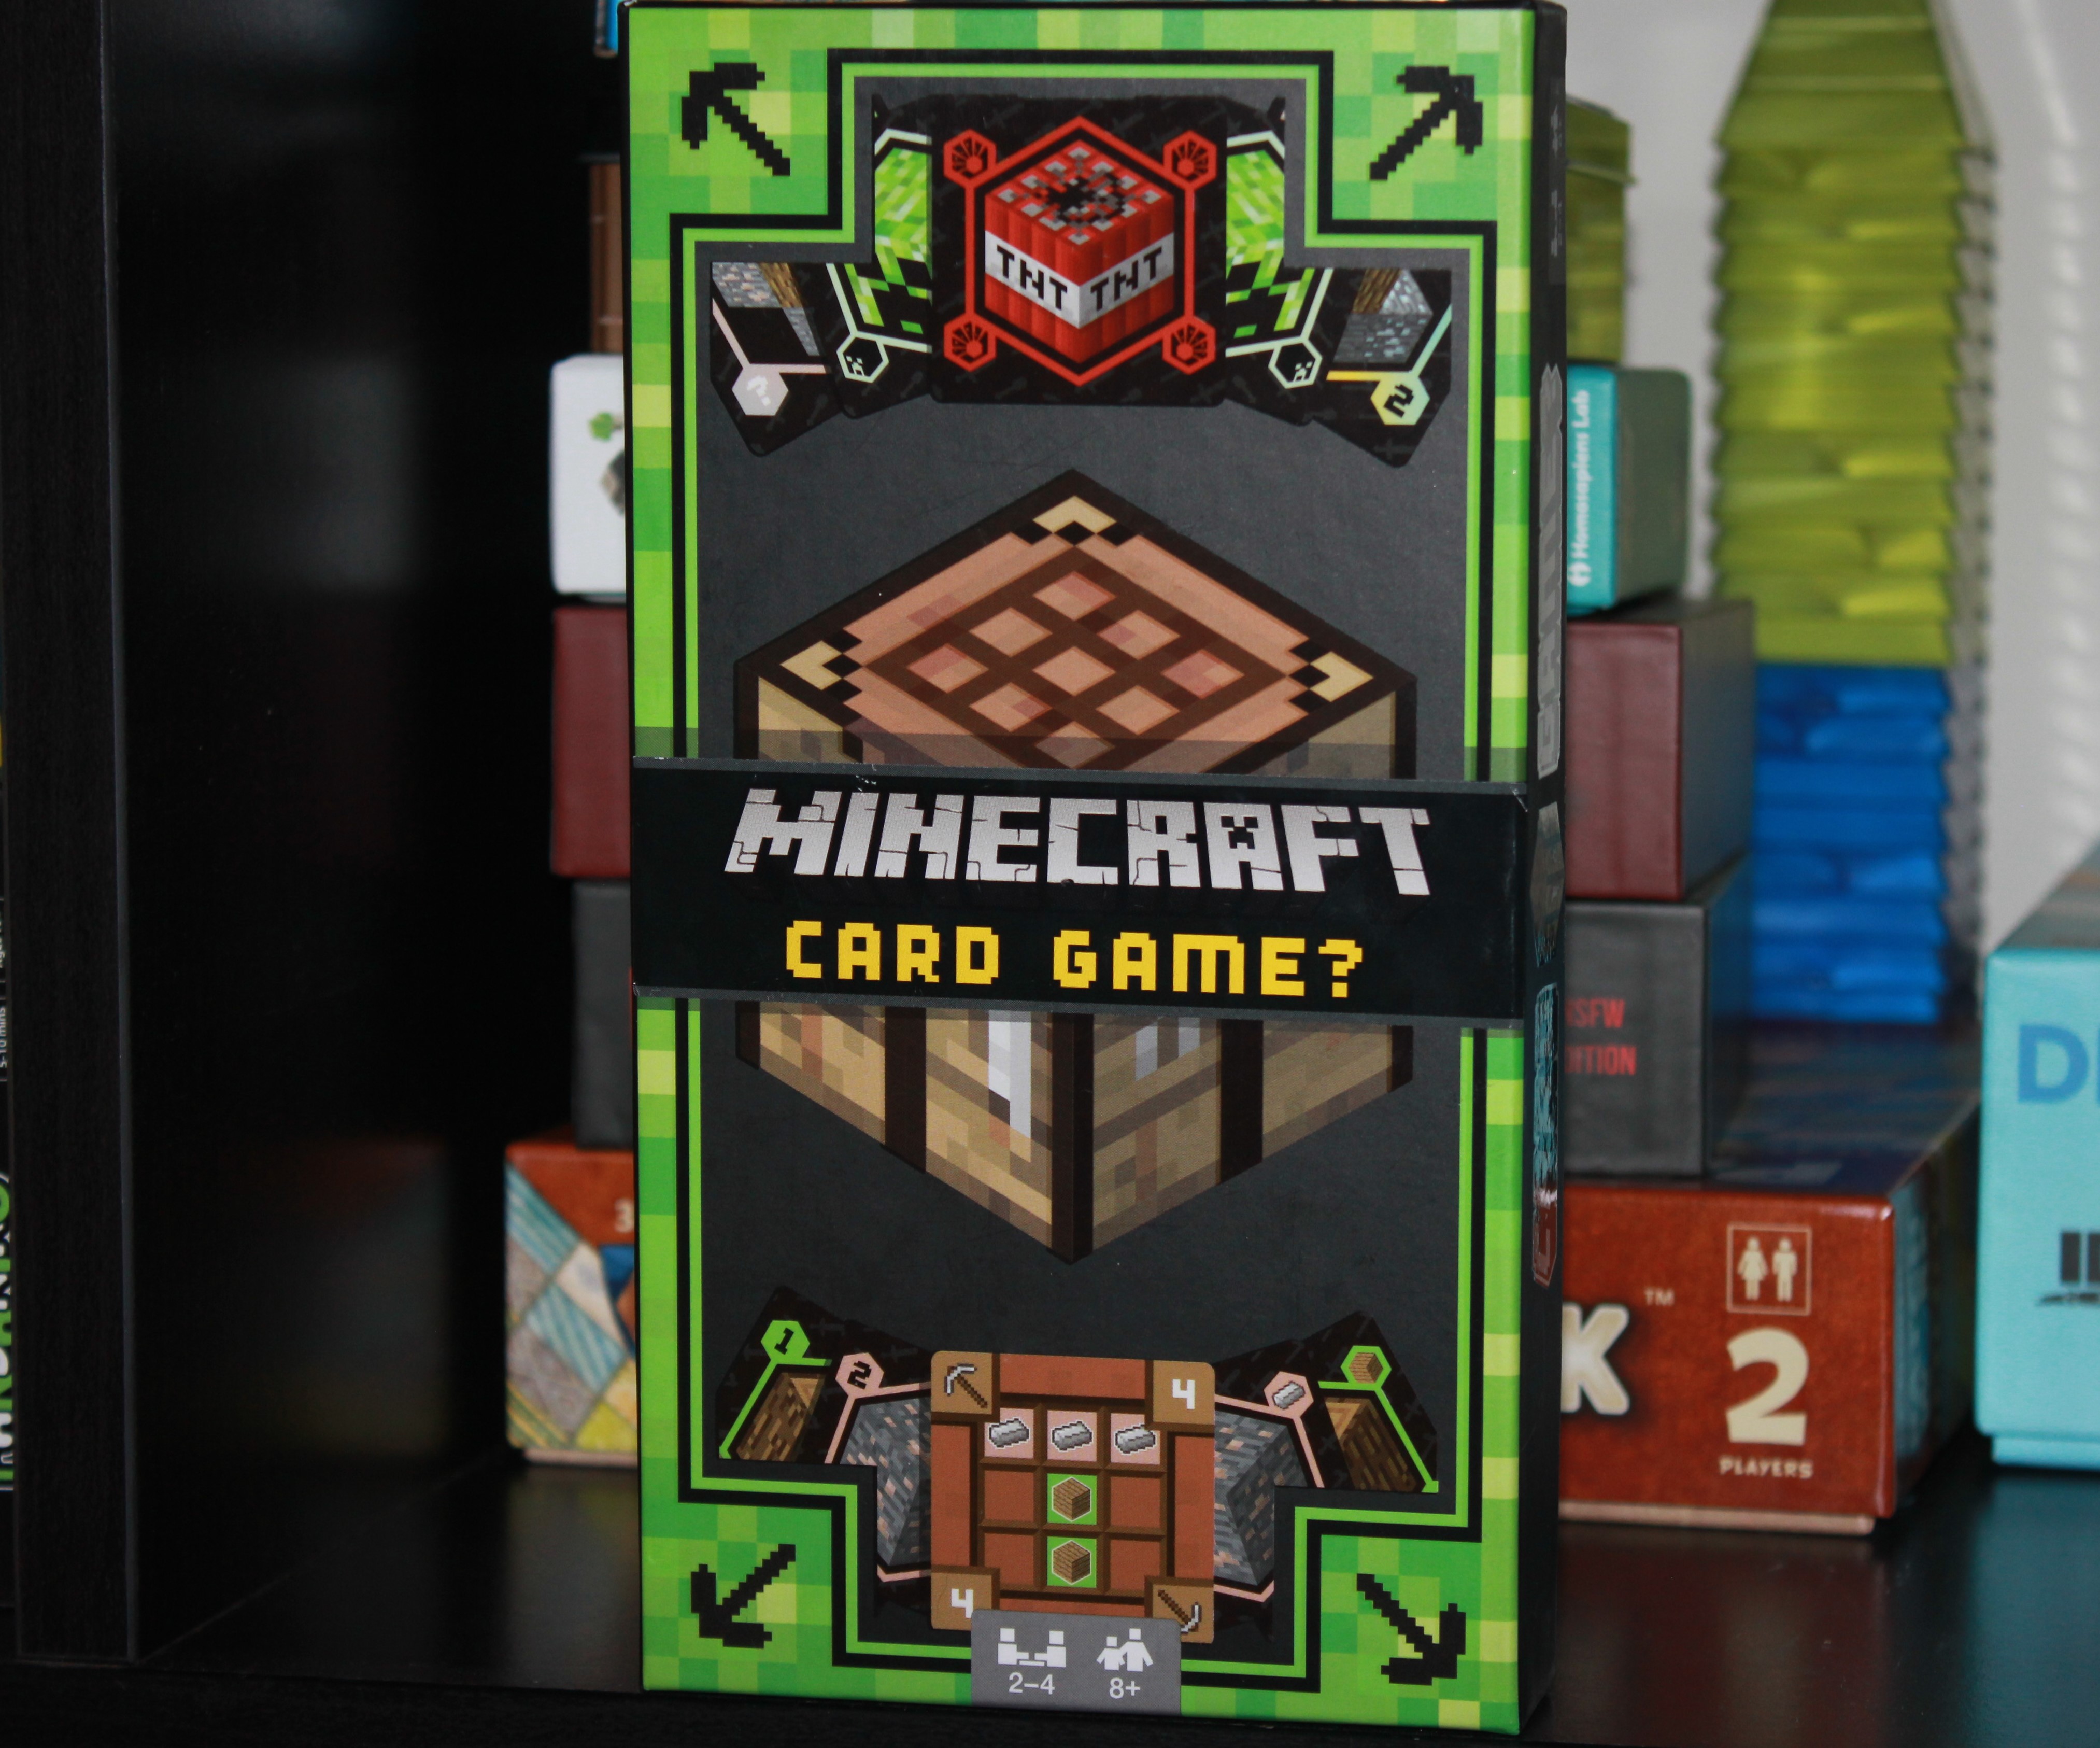 Minecraft The Card Game ?